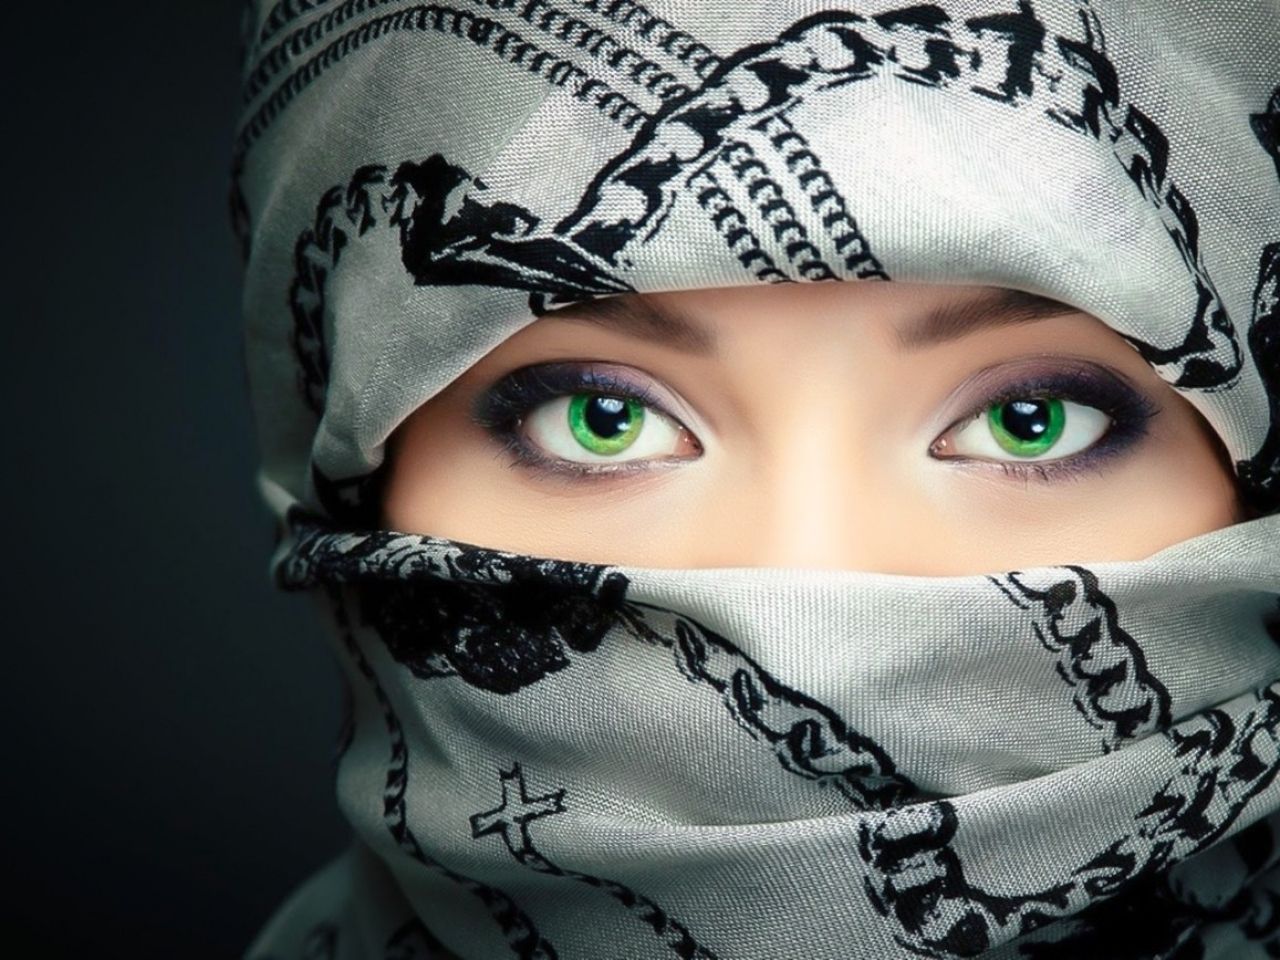 Girls With Scarf On Face - HD Wallpaper 